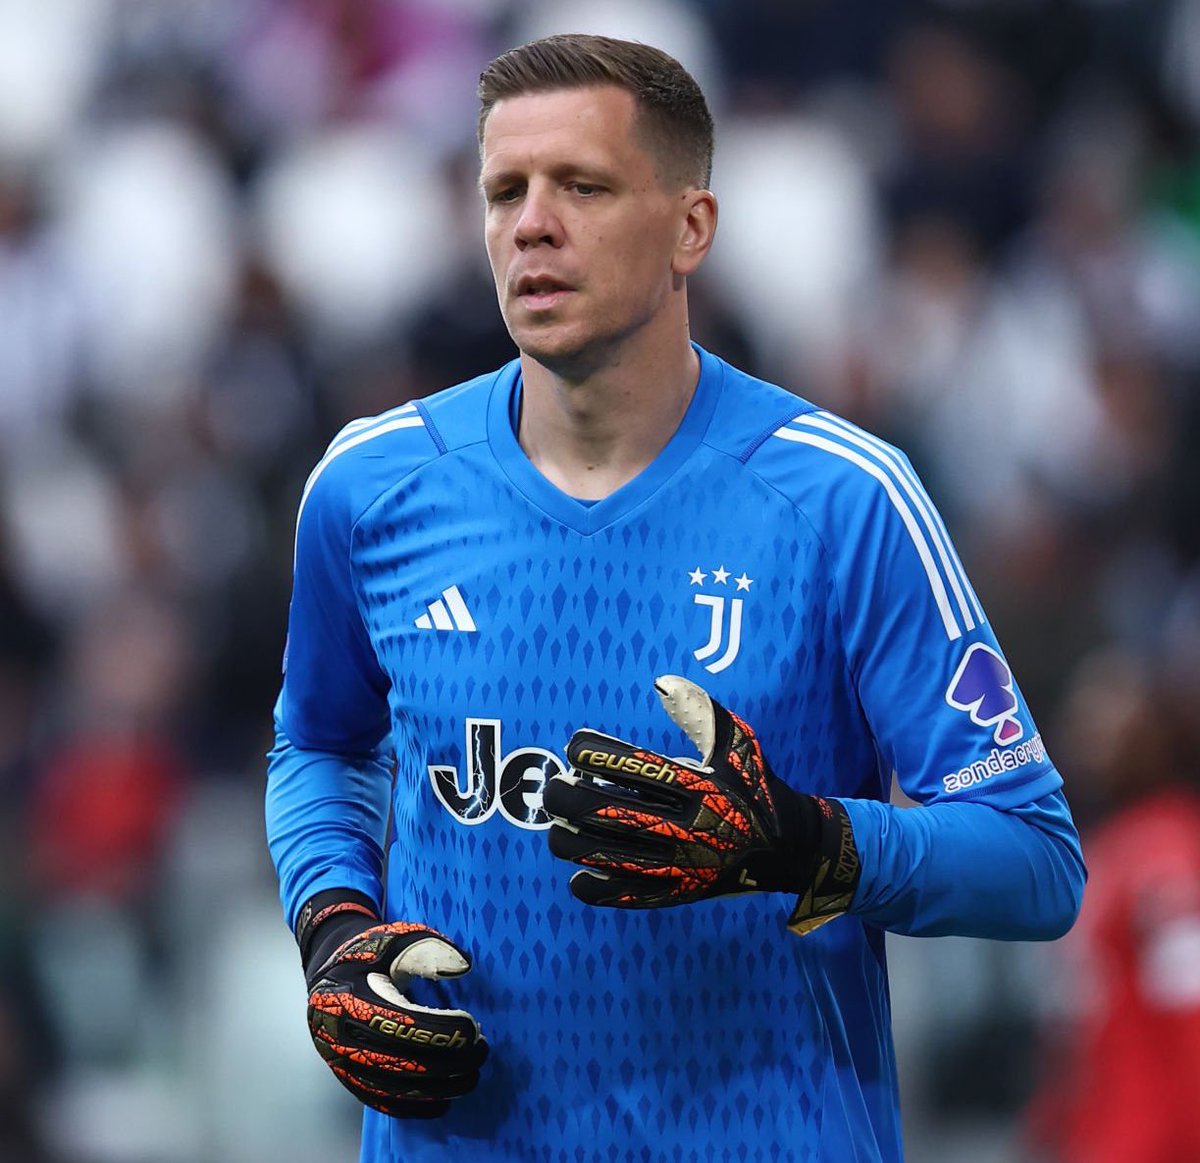 🗣️| @DeanJonesSoccer: “It’s true that Arsenal have shown an interest in signing Wojciech Szczesny, but it is hard to know if there is genuine scope for it to progress at the moment. They are on the lookout for a new back-up goalkeeper because Aaron Ramsdale is going to leave